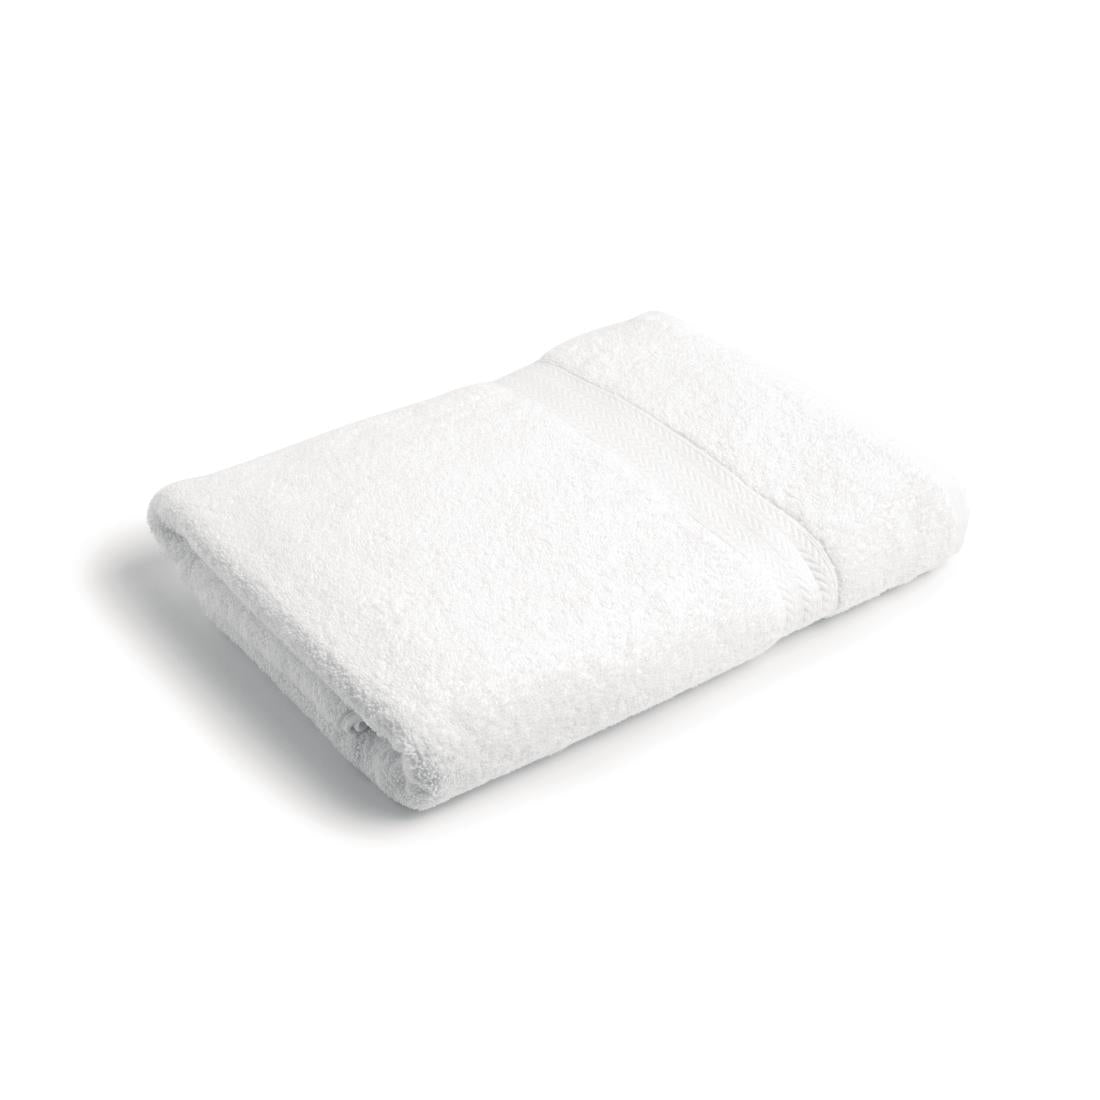 Which one is the best kitchen cloth? Comparison of cotton, microfiber, and wood fiber cloth.